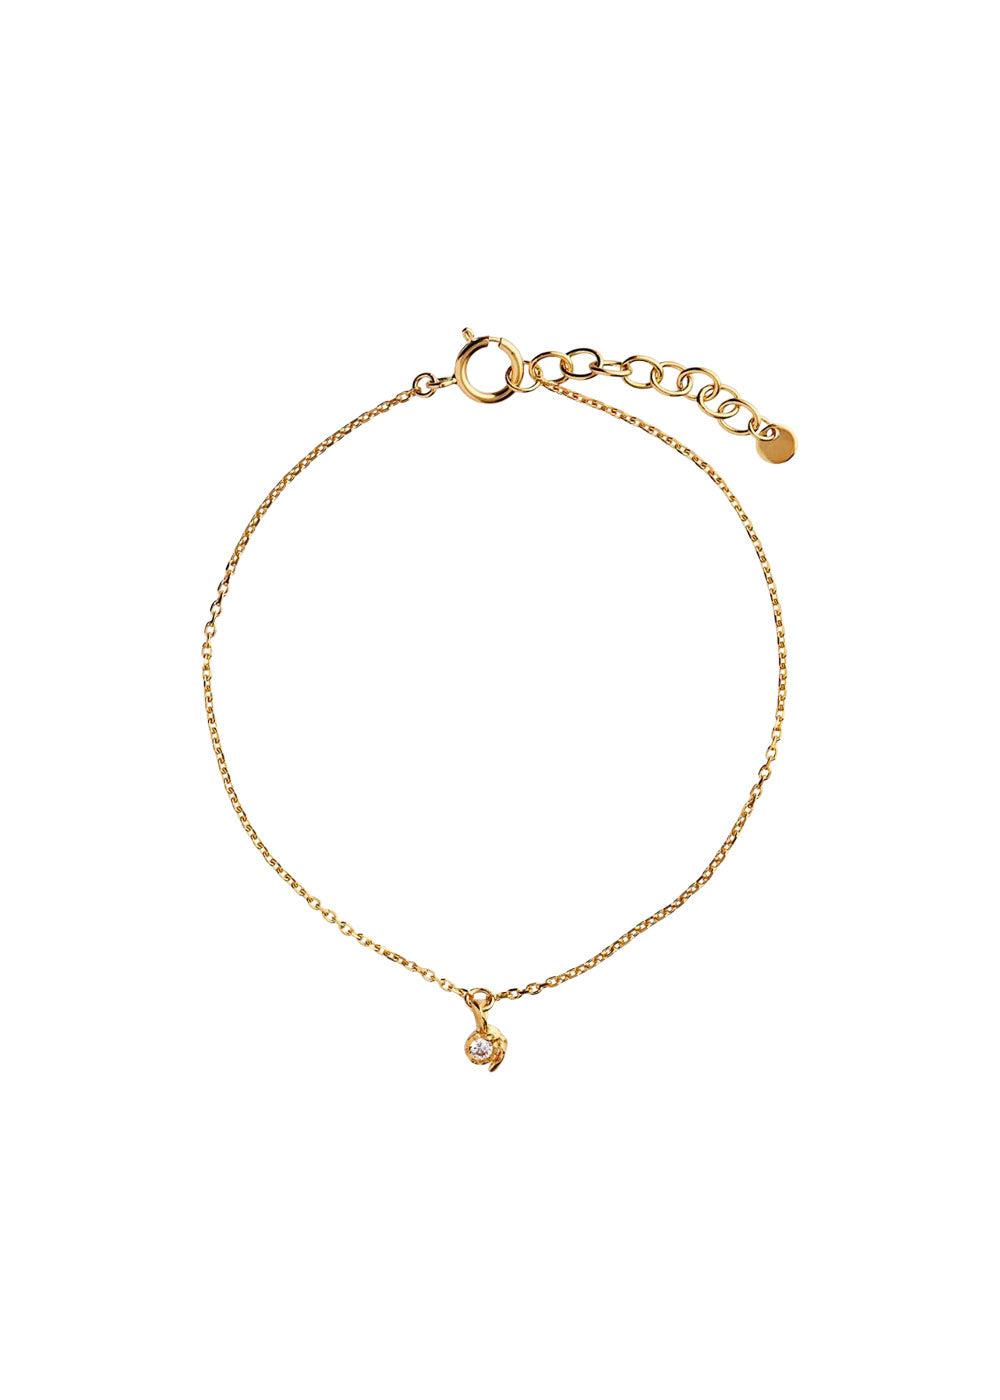 PlanBørnefonden Petit Flow Bracelet with Chain and Stone - Gold